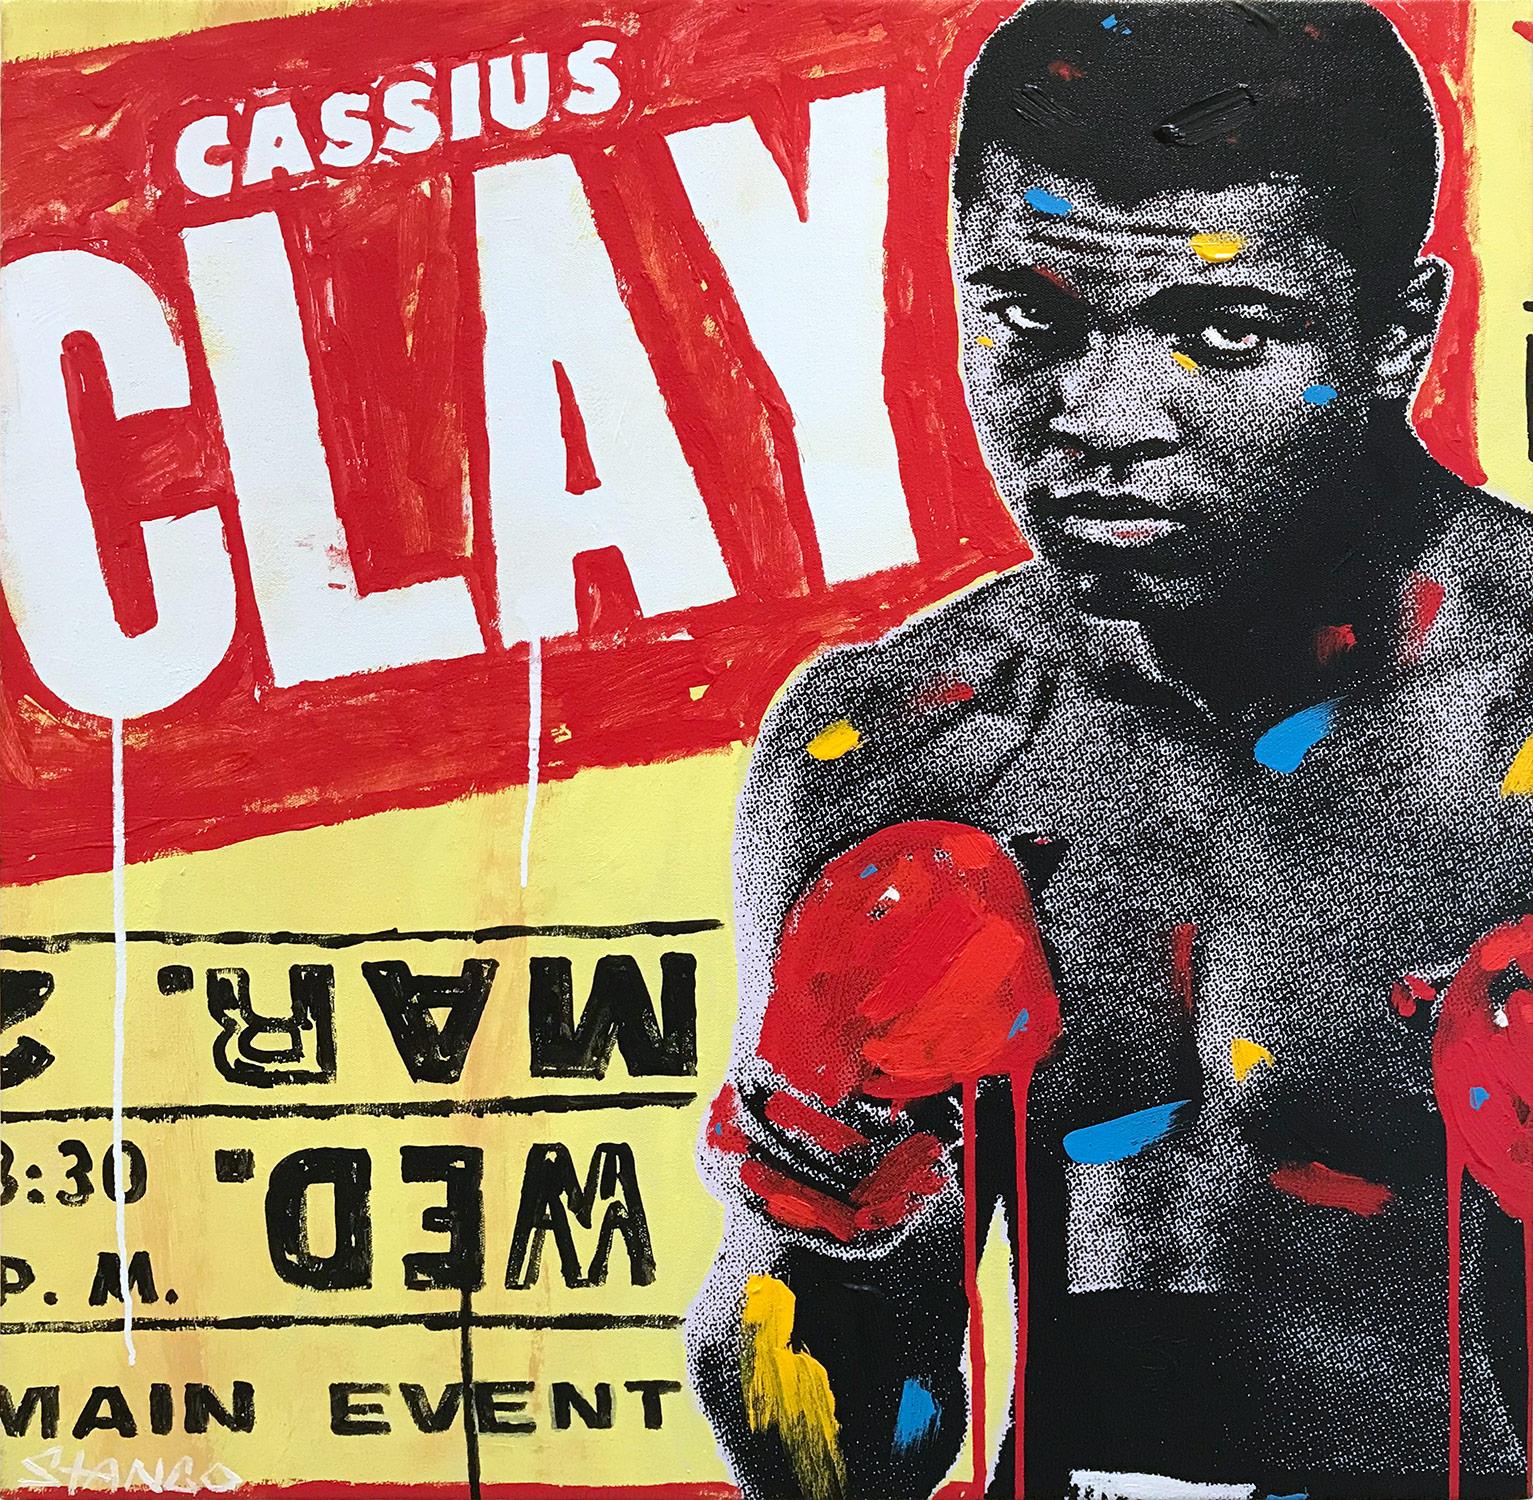 John Stango Abstract Painting - "Cassius Clay" Muhammad Ali Pop Art Painting on Canvas Red & Yellow Background